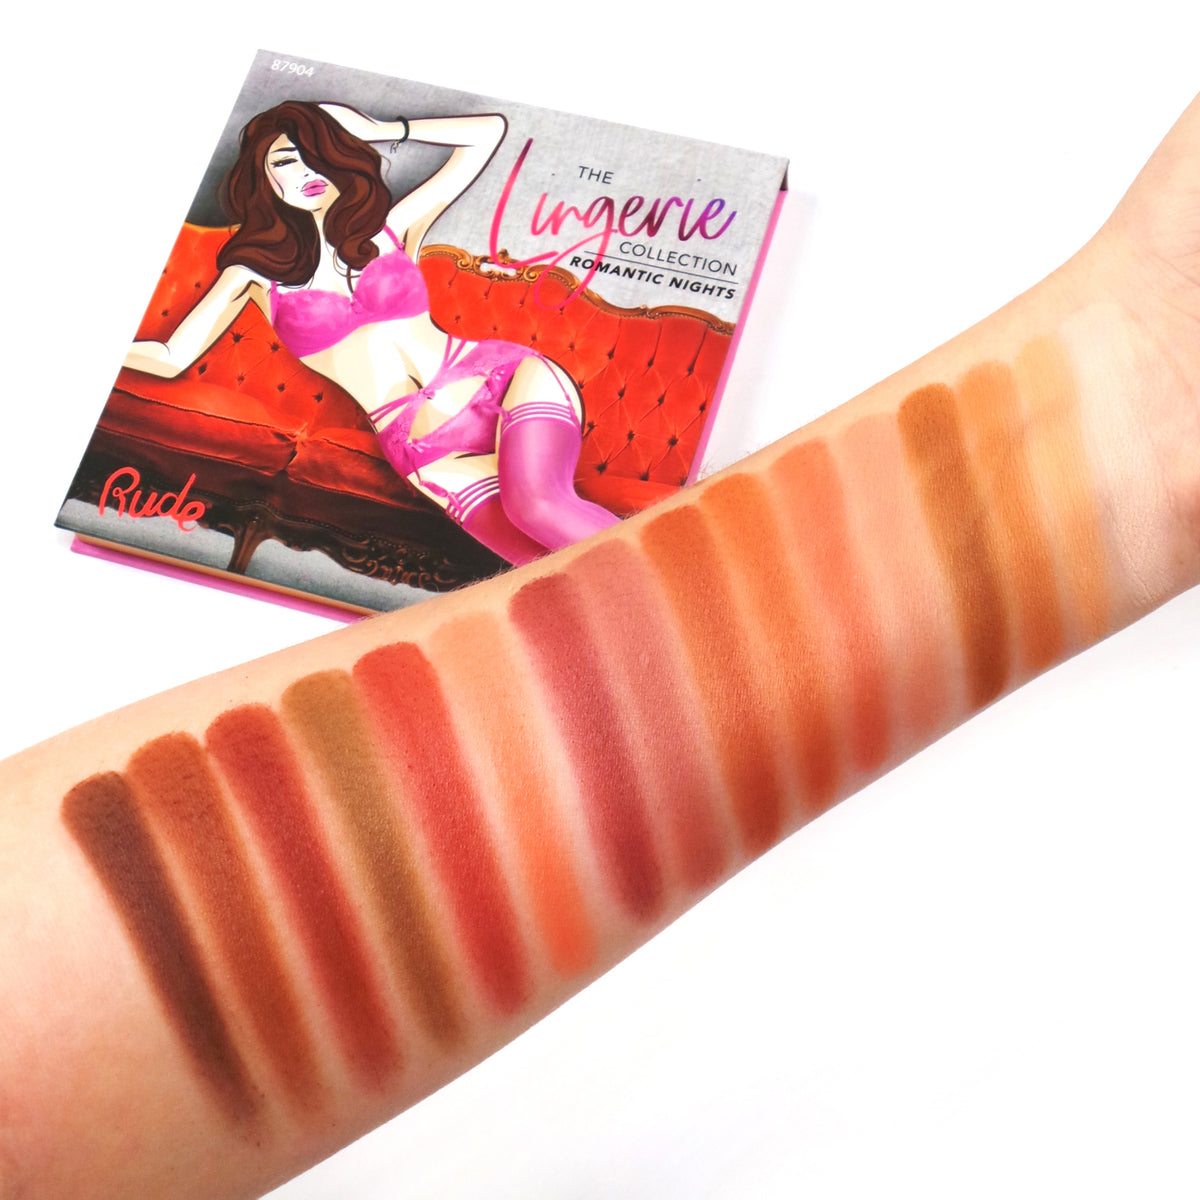 The Lingerie Collection - Romantic Nights (Nudes) Swatch